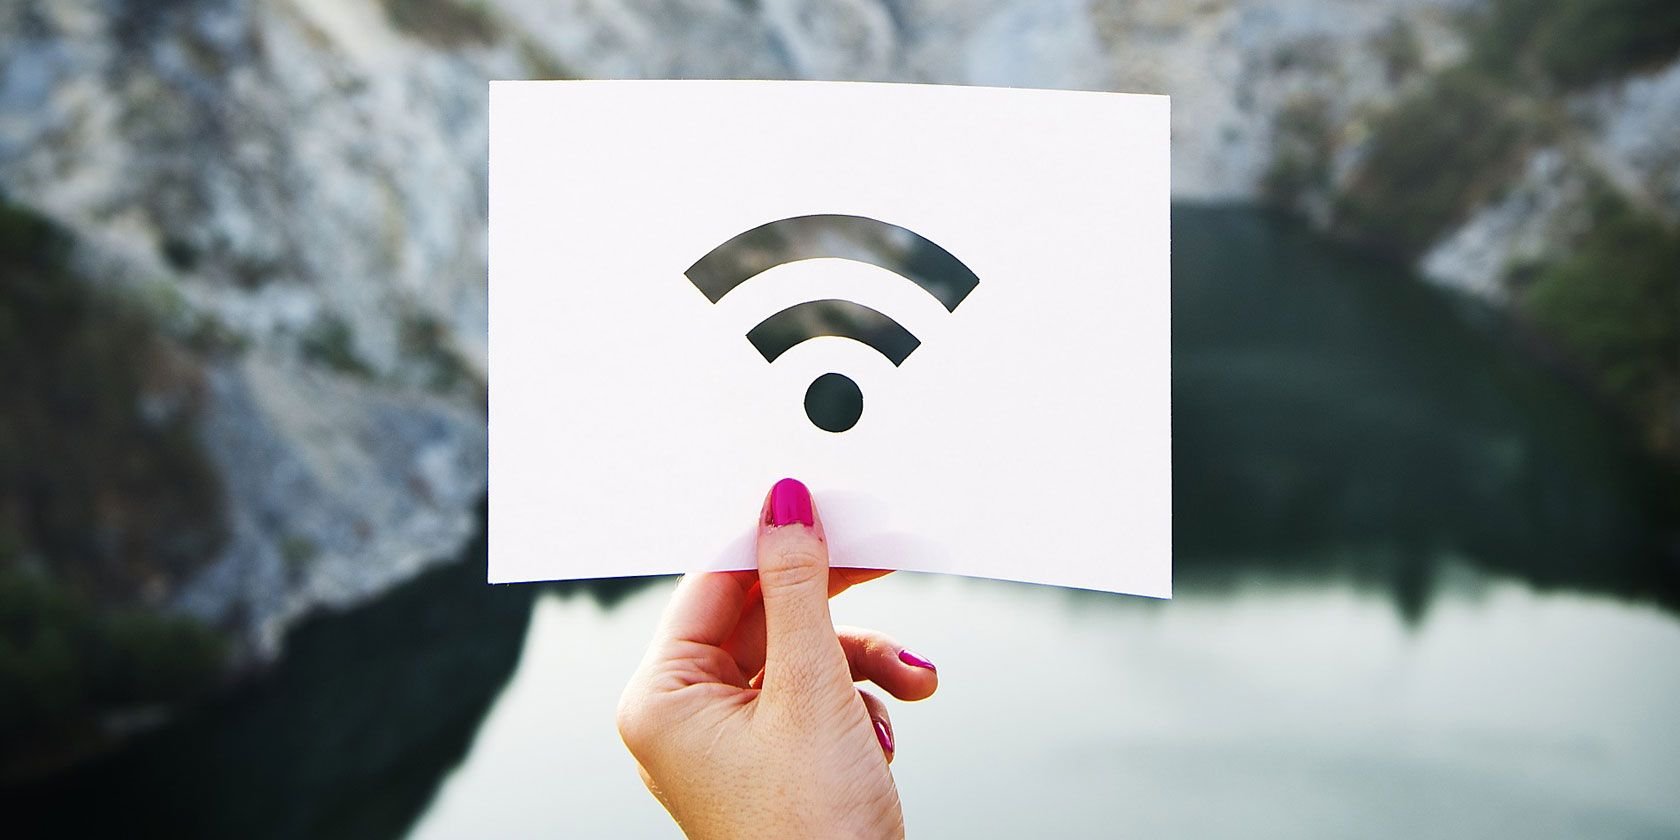 WEP, WPA, or WPA2: How to Tell What Security Type Your Wi-Fi Is